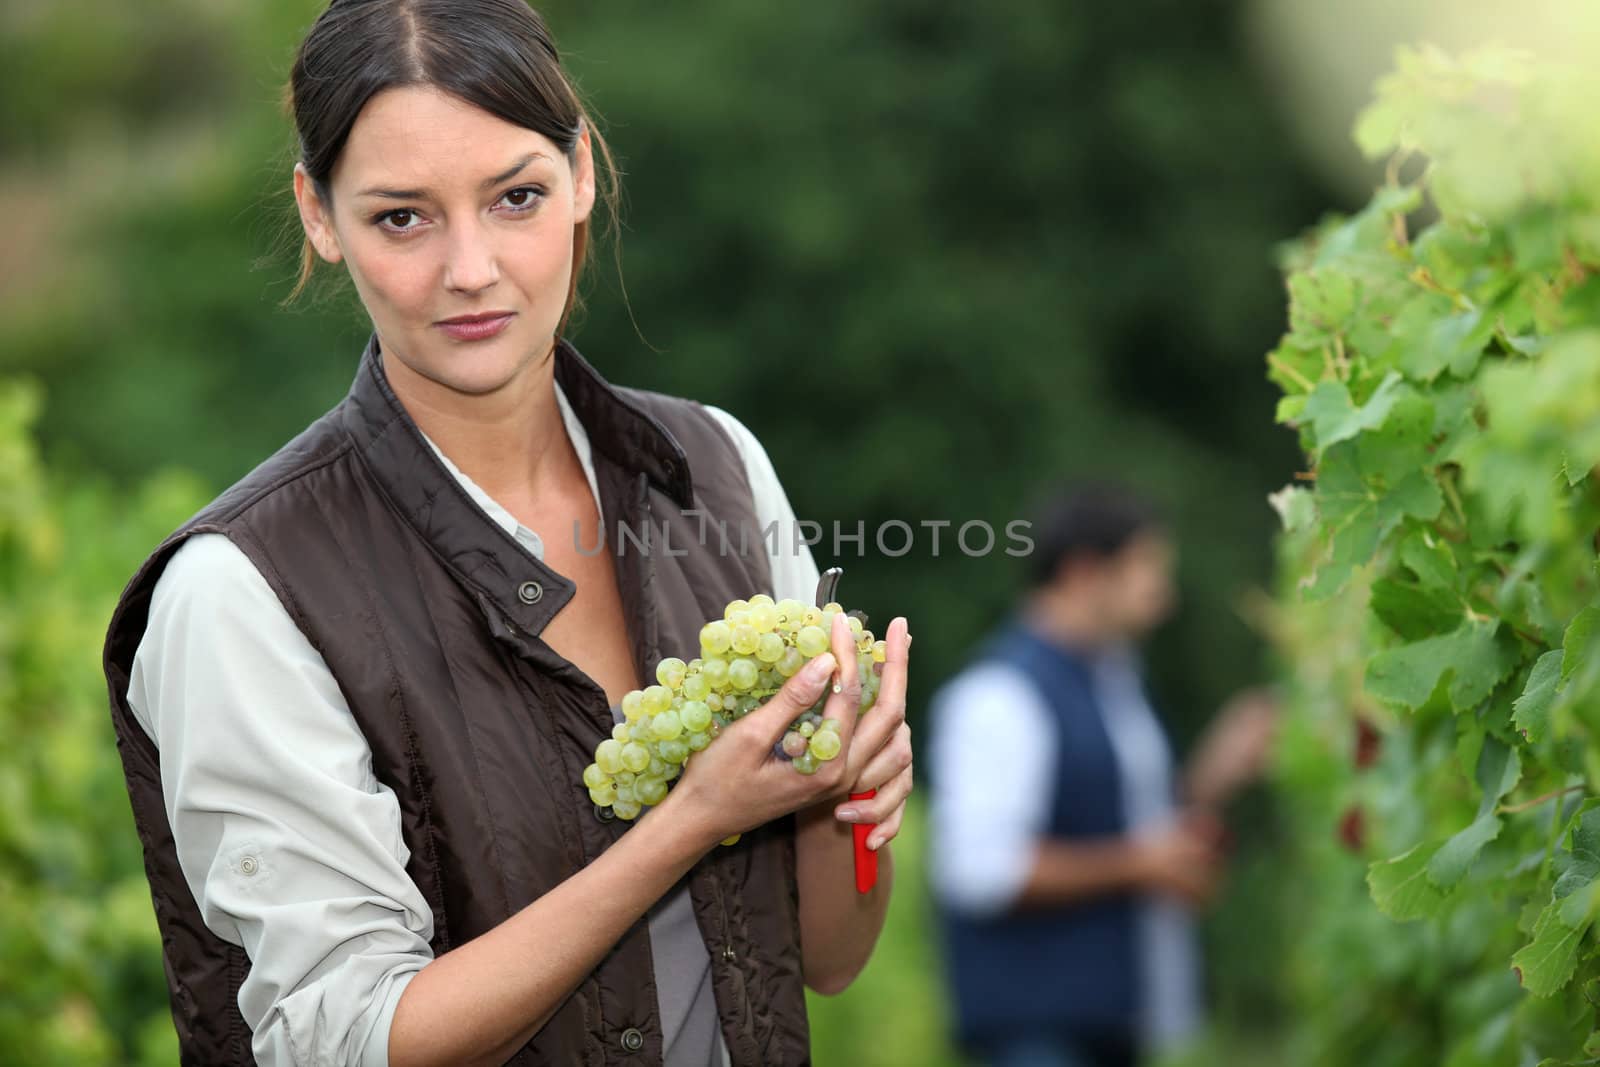 Woman harvesting grapes. by phovoir